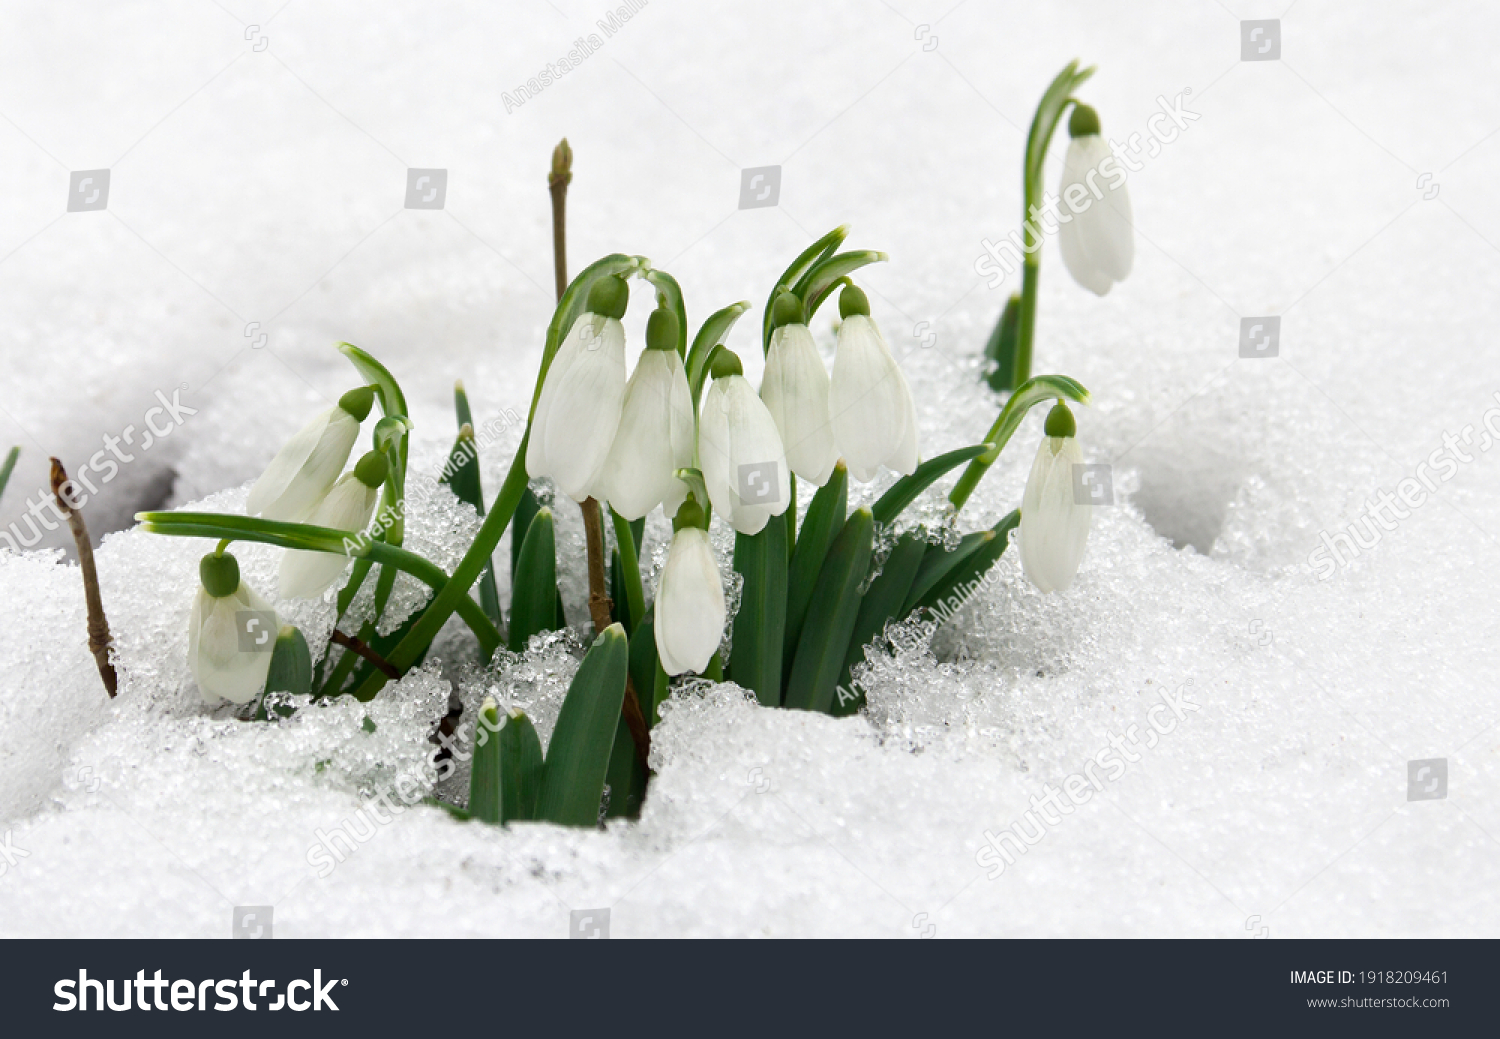 Spring white snowdrops ( Galanthus nivalis ) in snow in the forest with space for text #1918209461